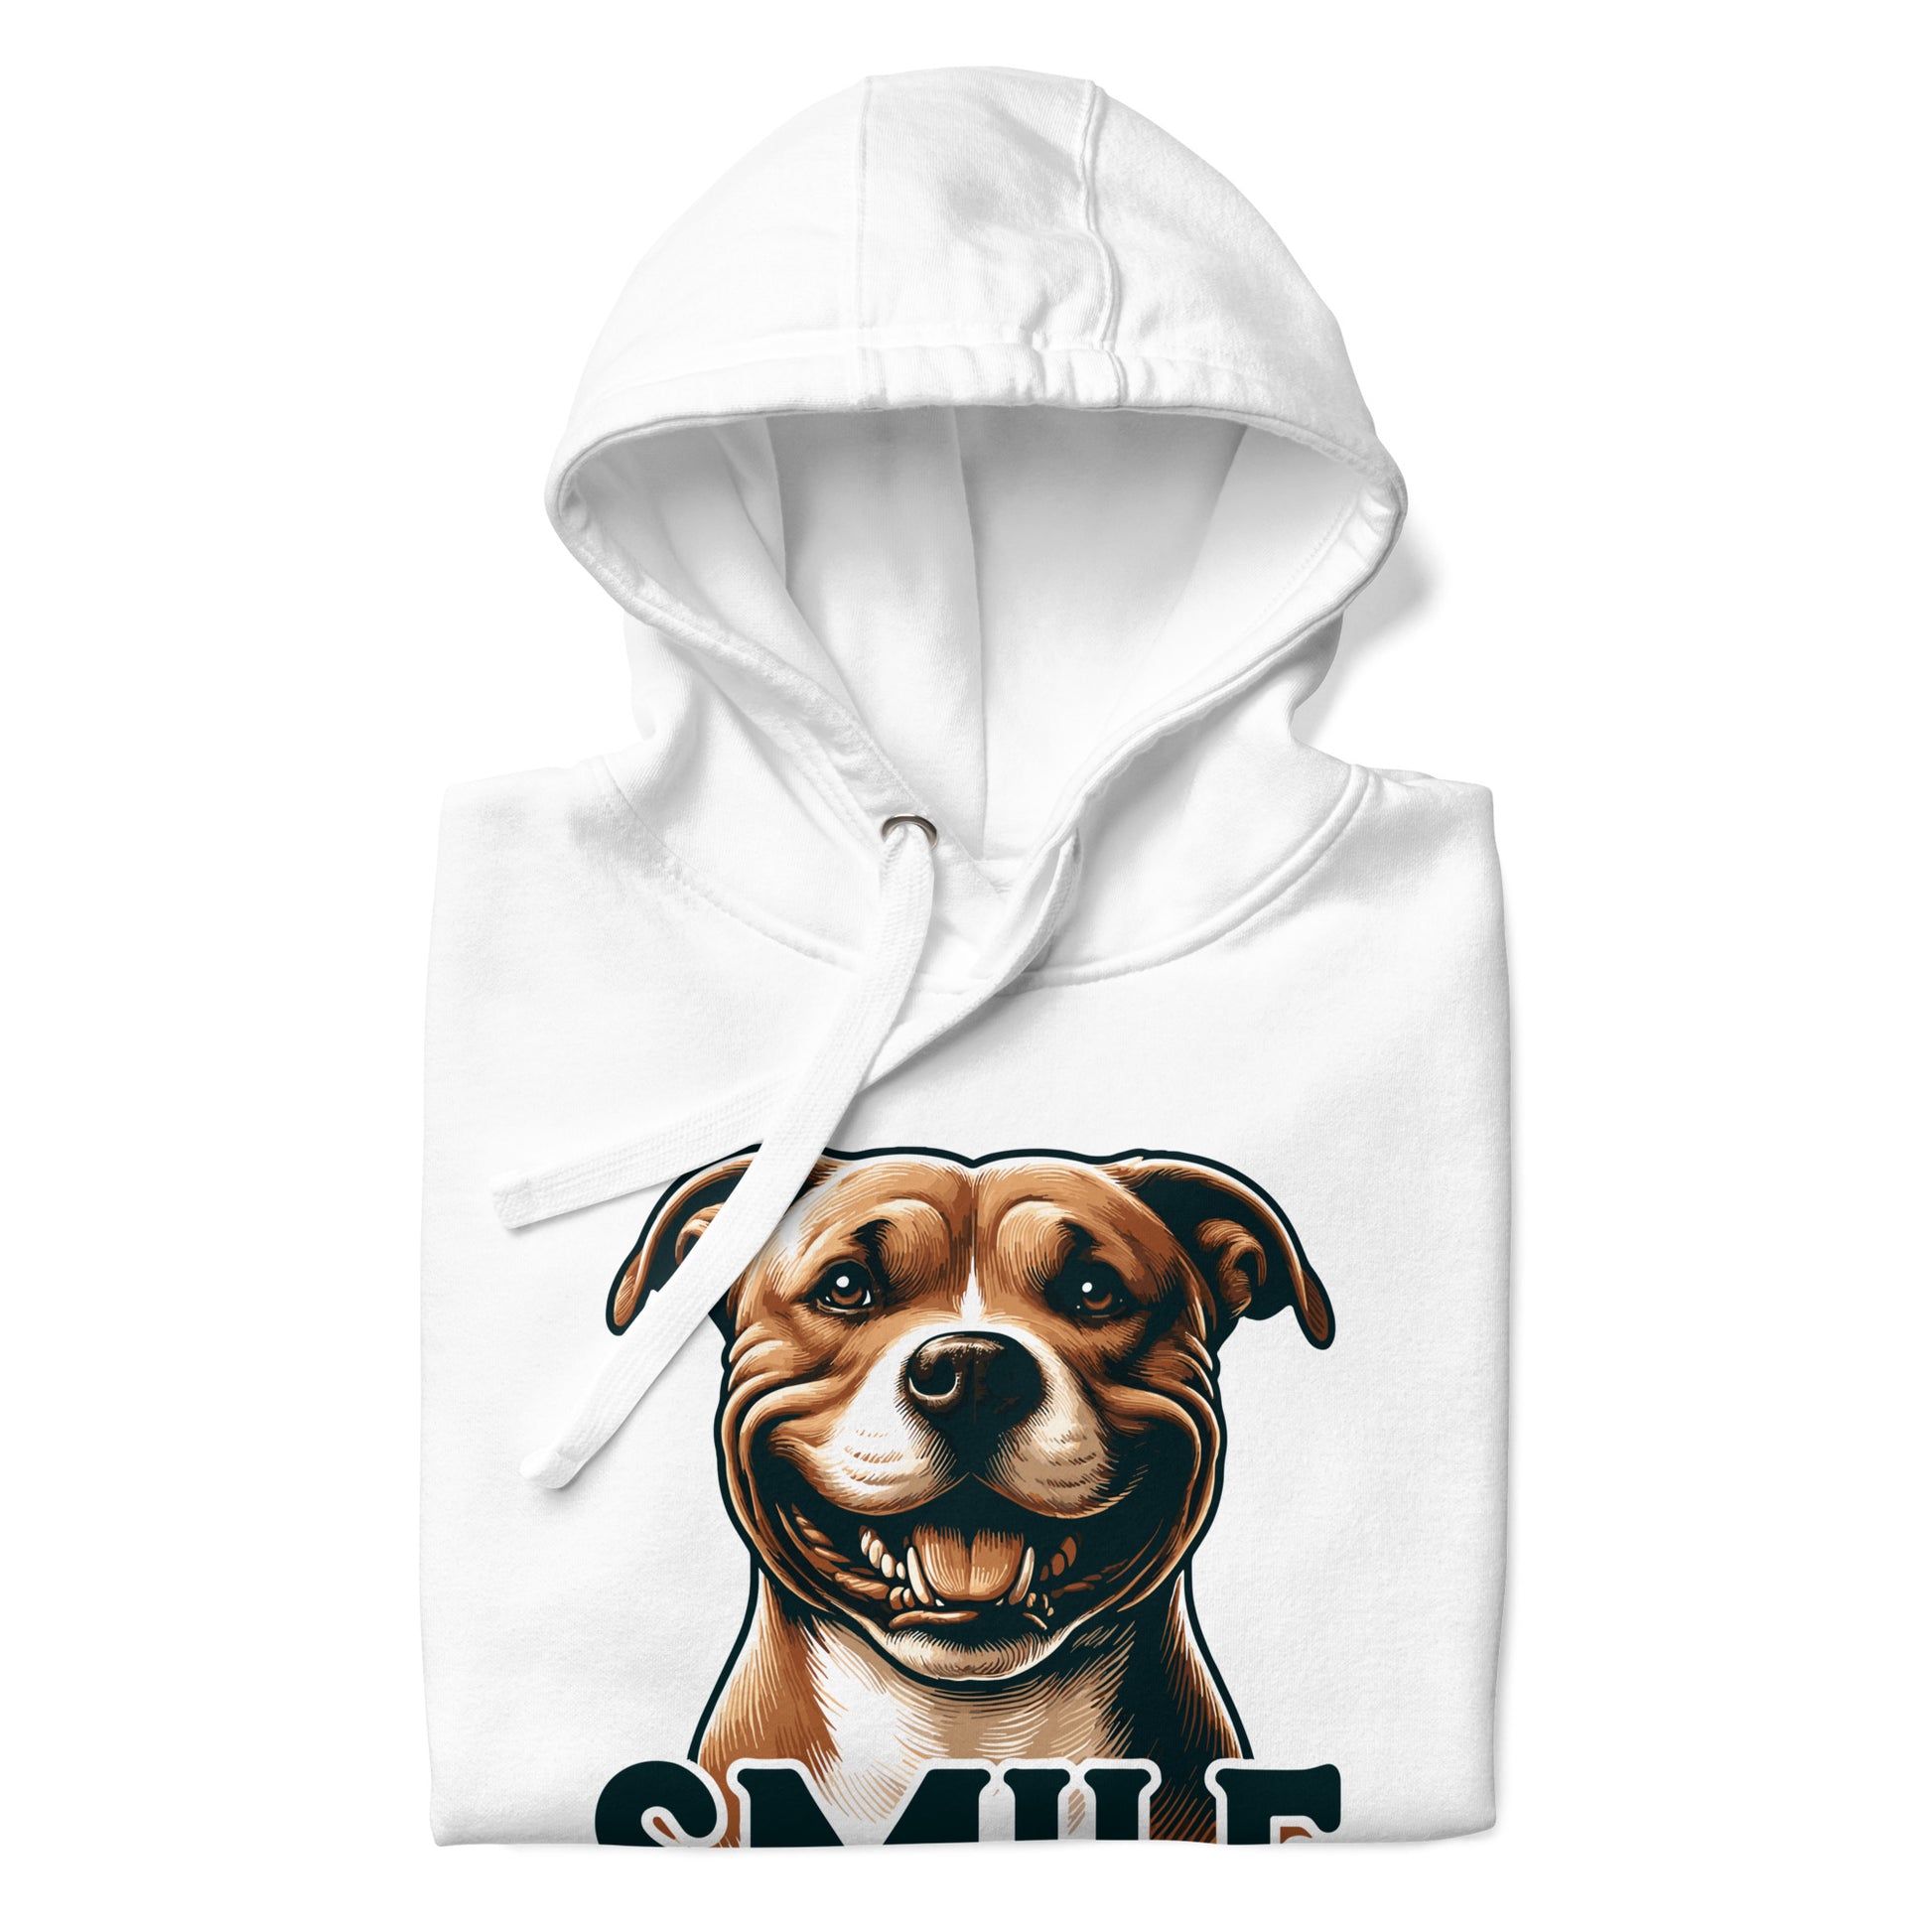 Cheerful Canine 'SMILE' Pitbull Hoodie - Pittie Choy